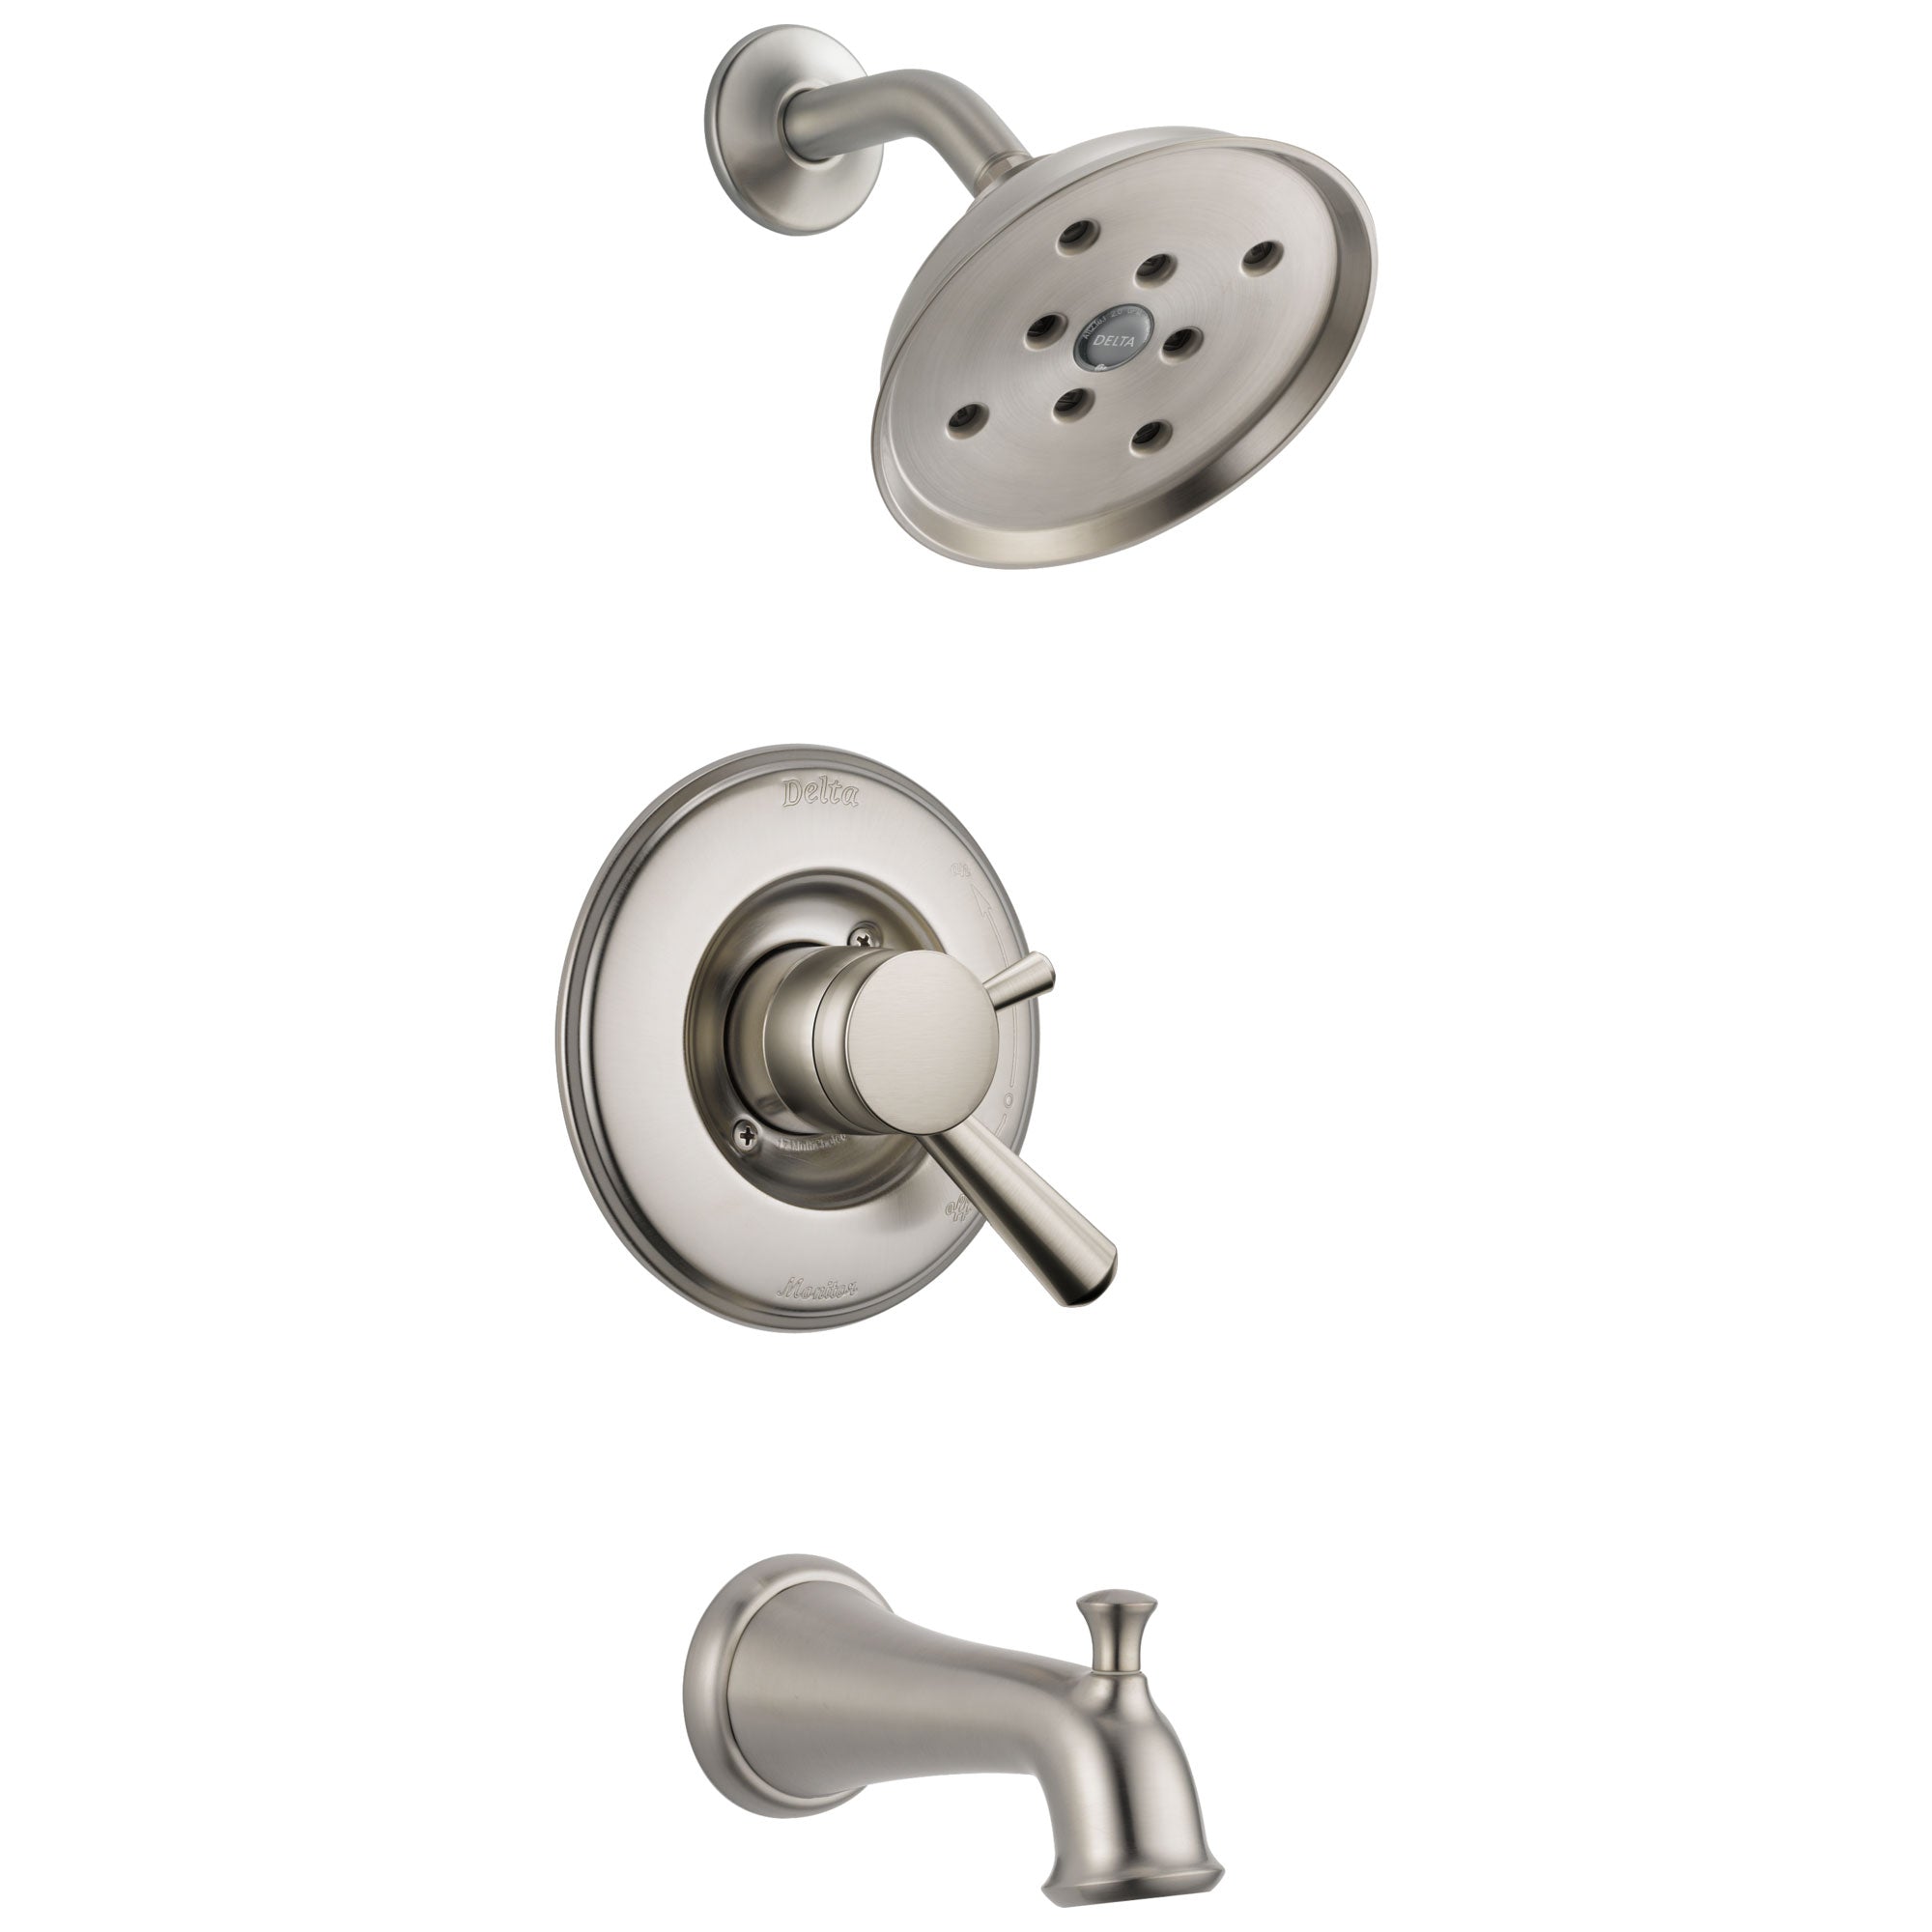 Delta Linden Collection Stainless Steel Finish Monitor 17 H2Okinetic Tub and Shower Combination Faucet Trim Kit (Valve Sold Separately) DT17493SS